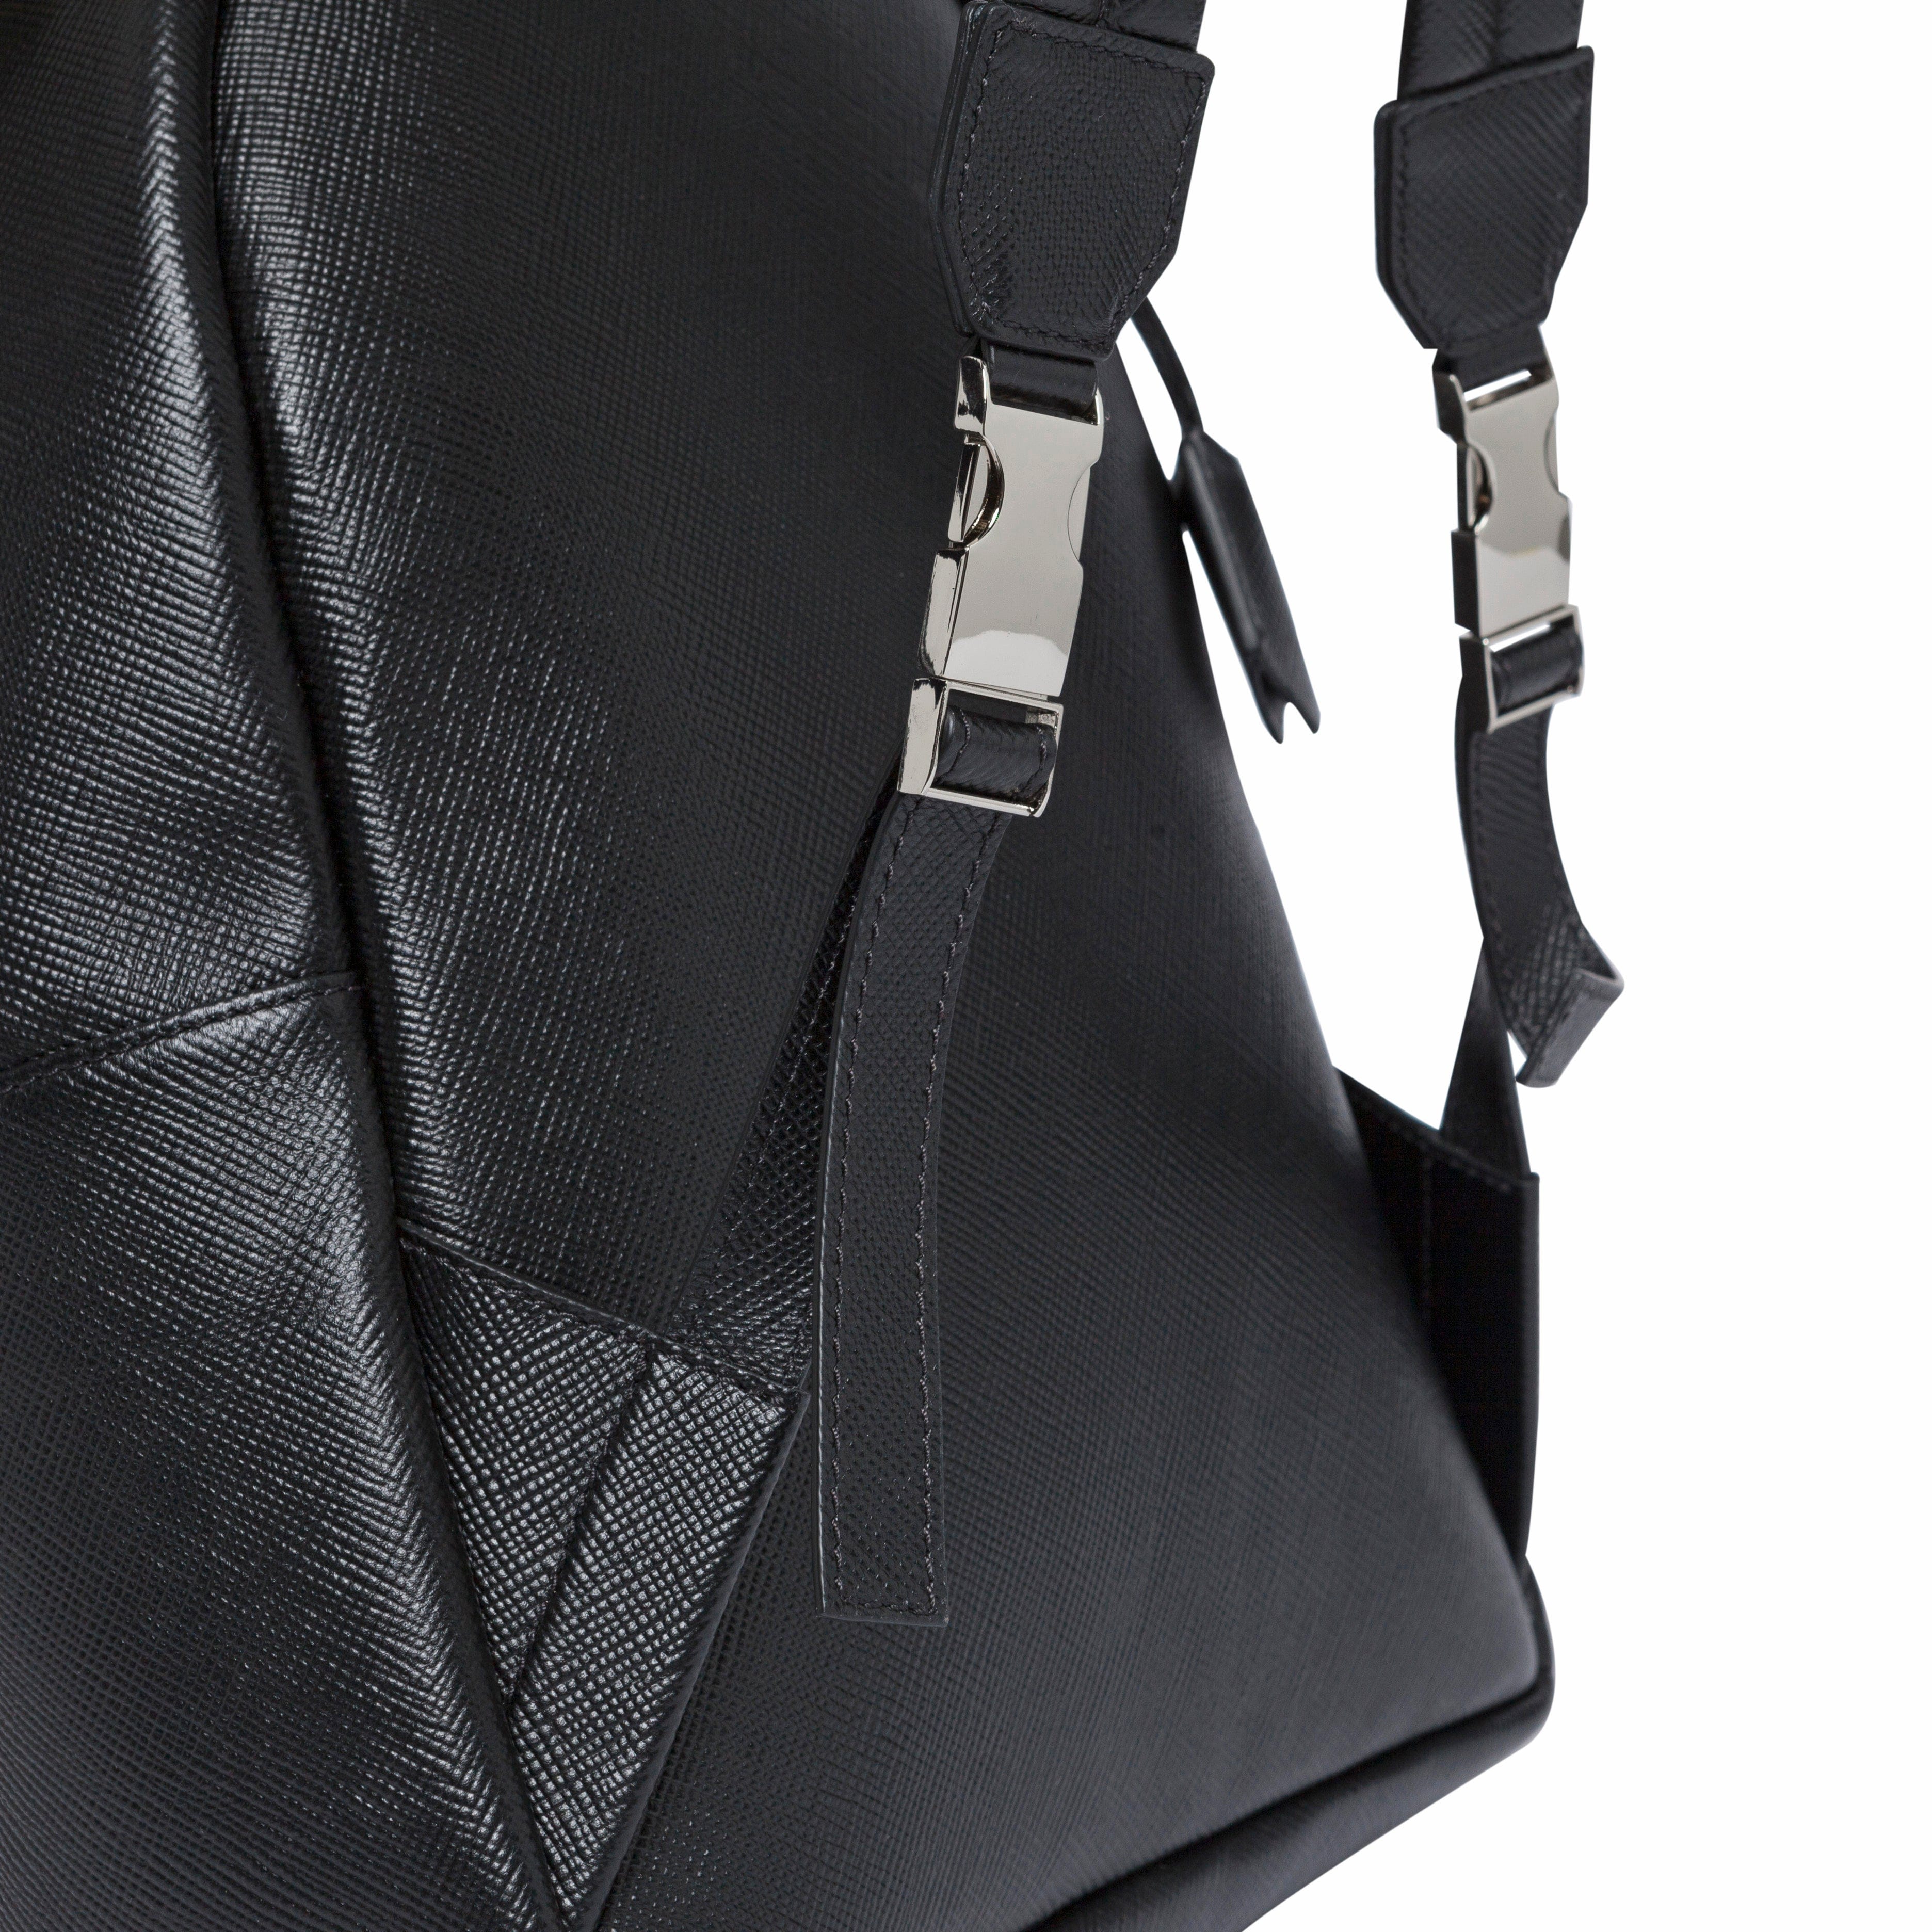 Skye | Backpack Small | Black | Saffiano Leather | Made in Italy